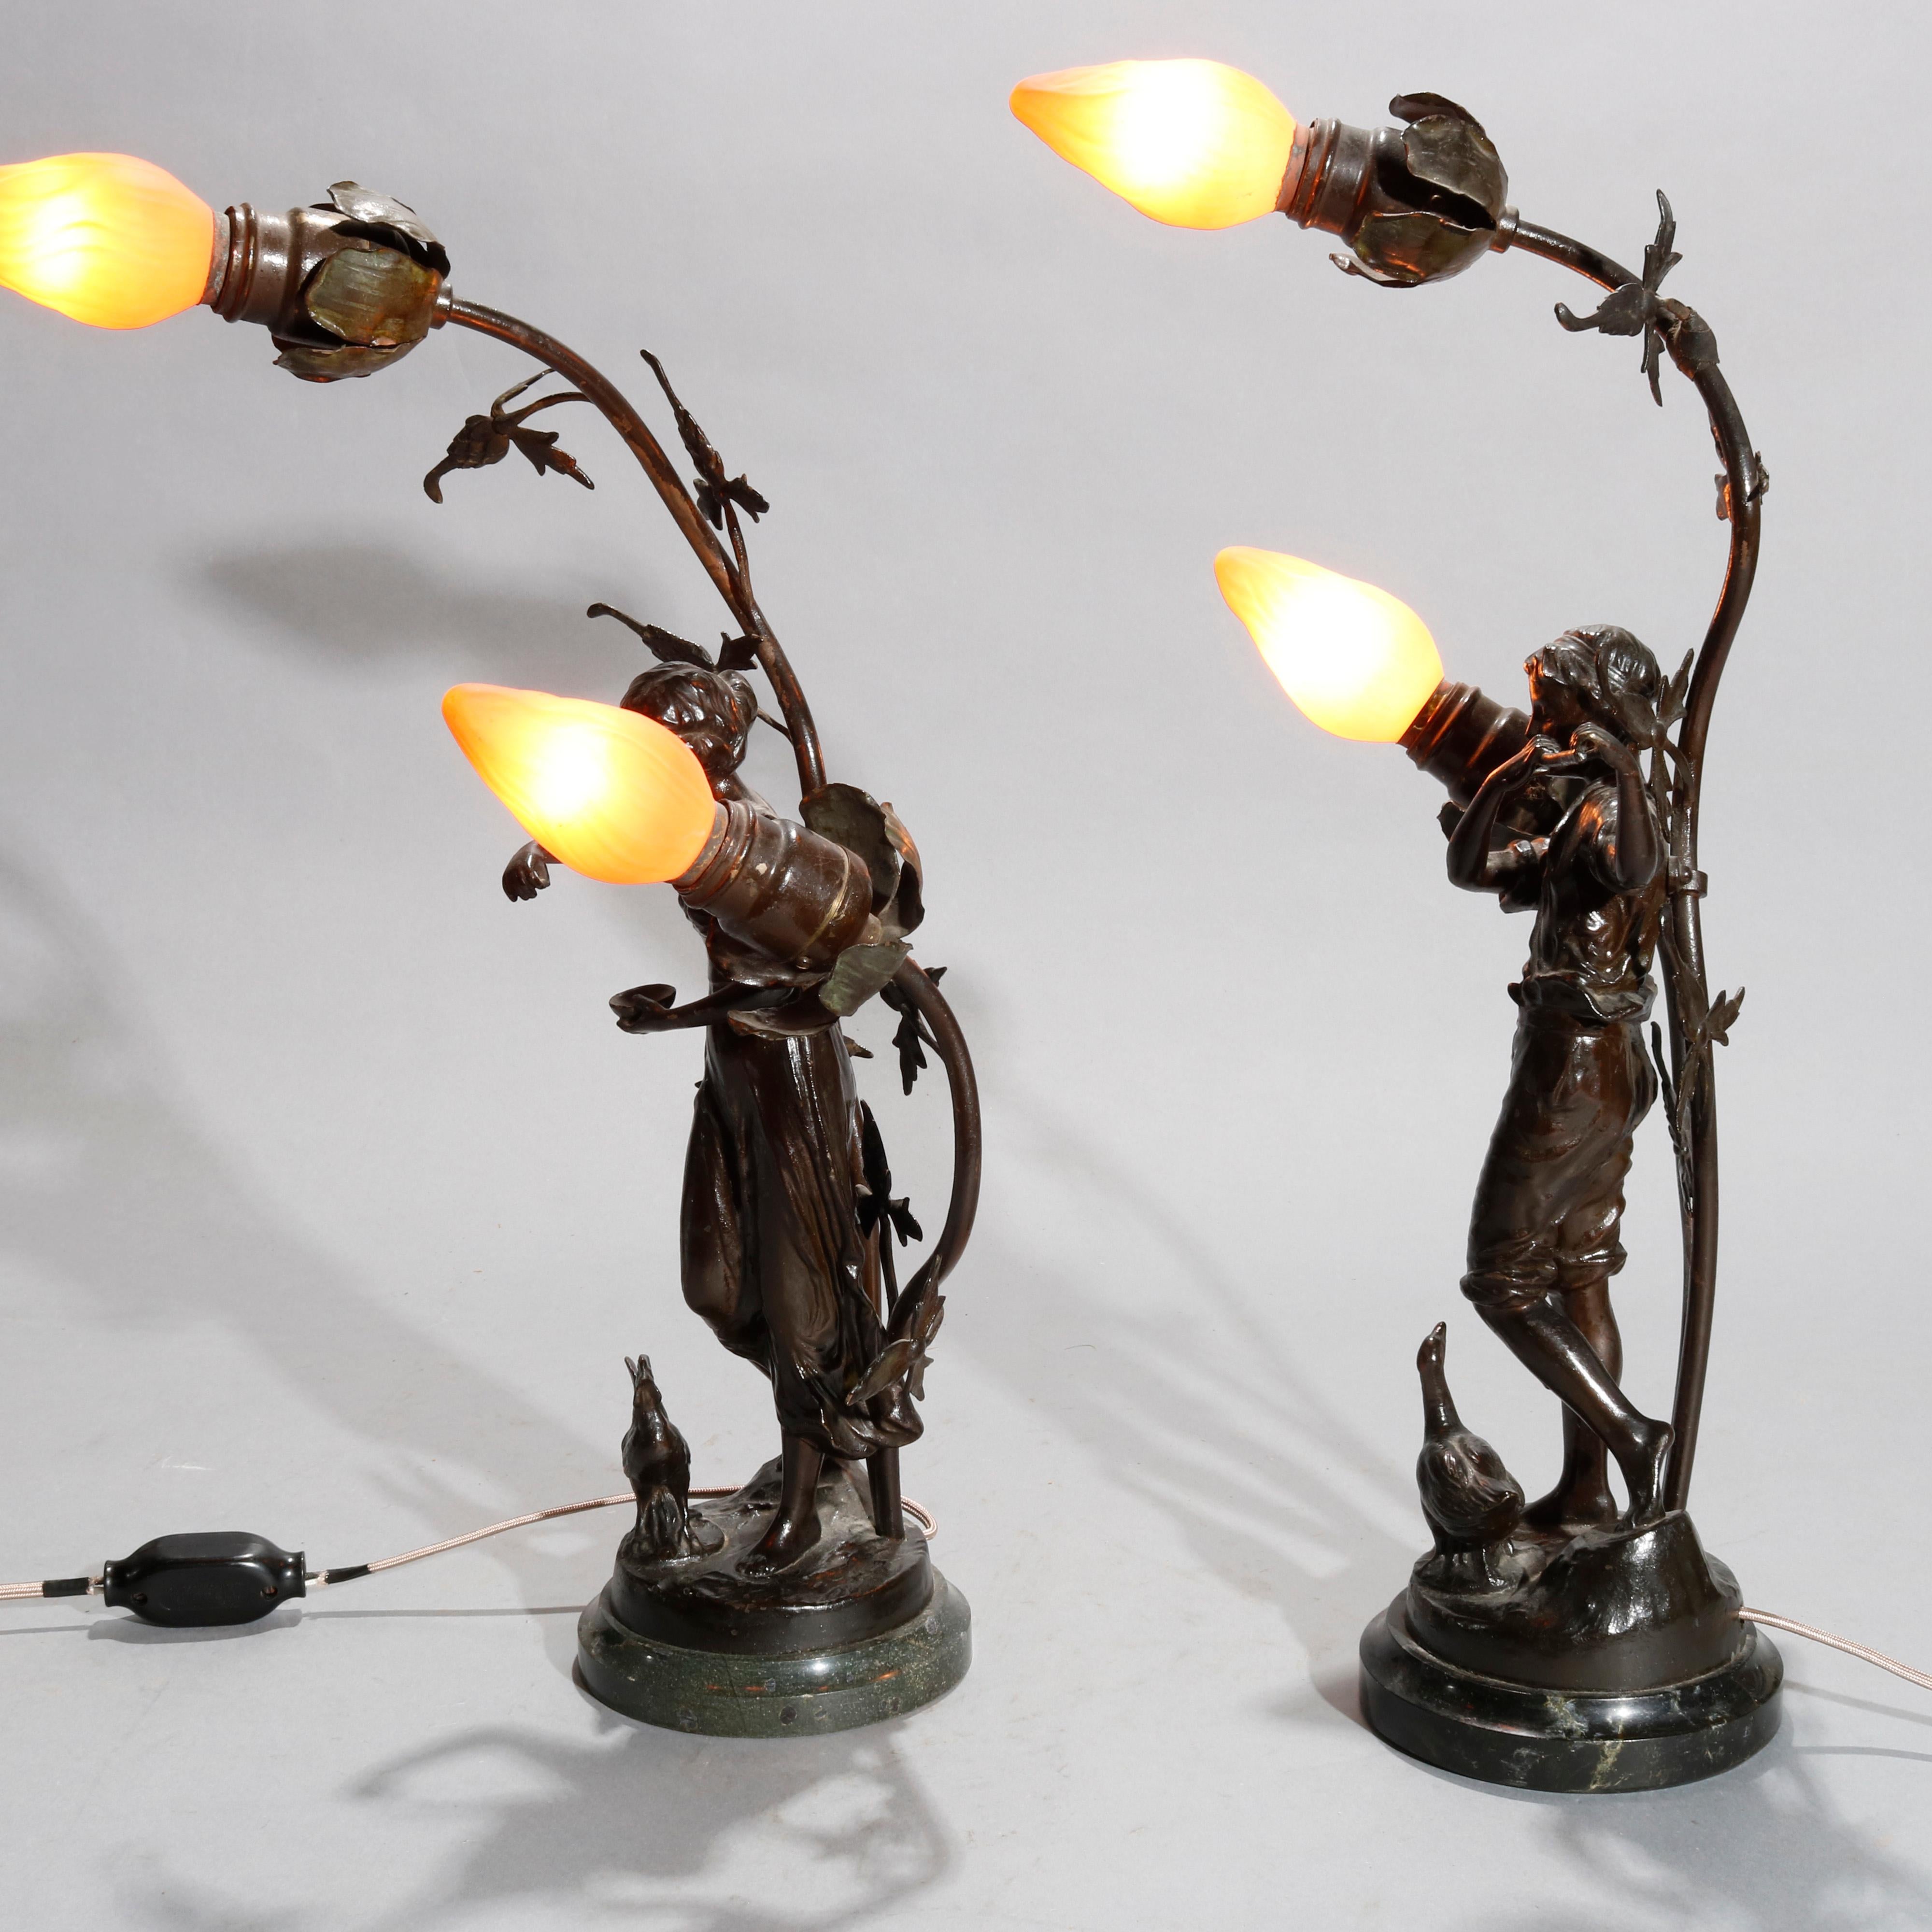 20th Century Antique Pair of French Bronzed Metal Figural Newel Post Lamps, circa 1900